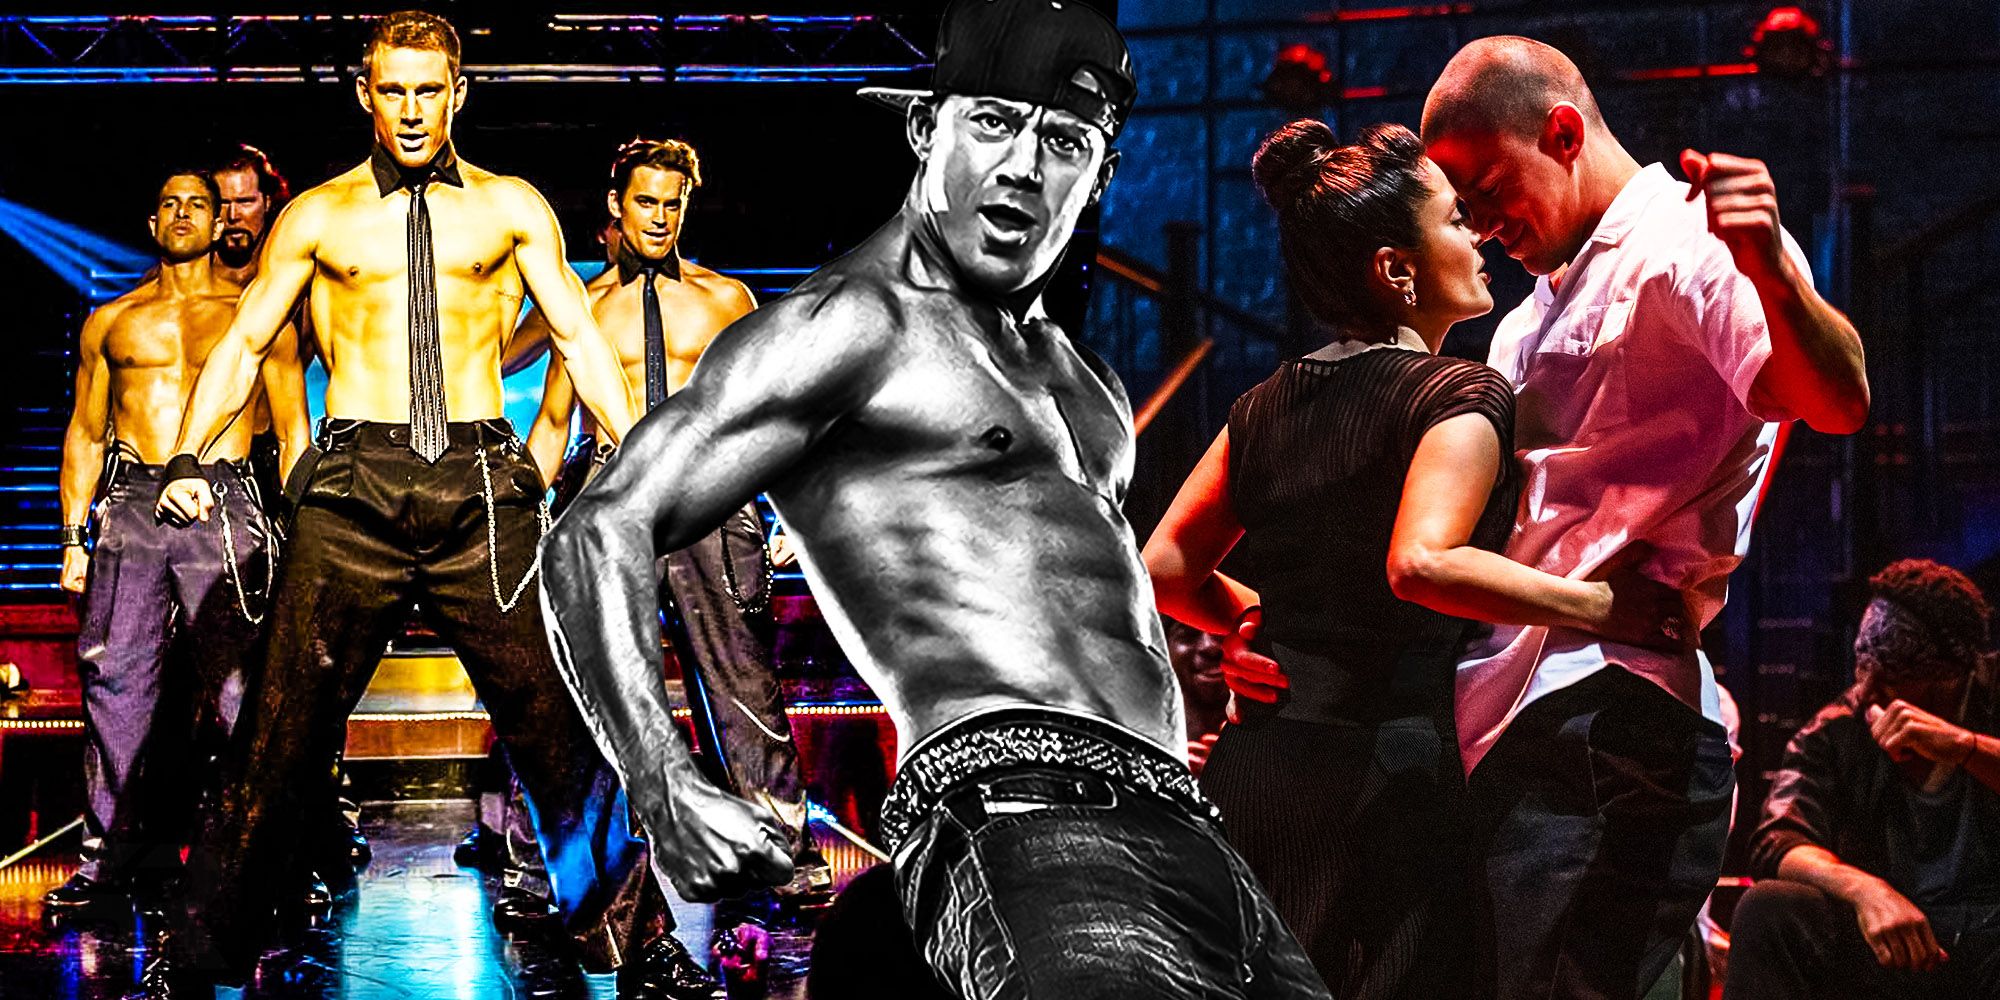 A composite image of scenes from the Magic Mike Movies